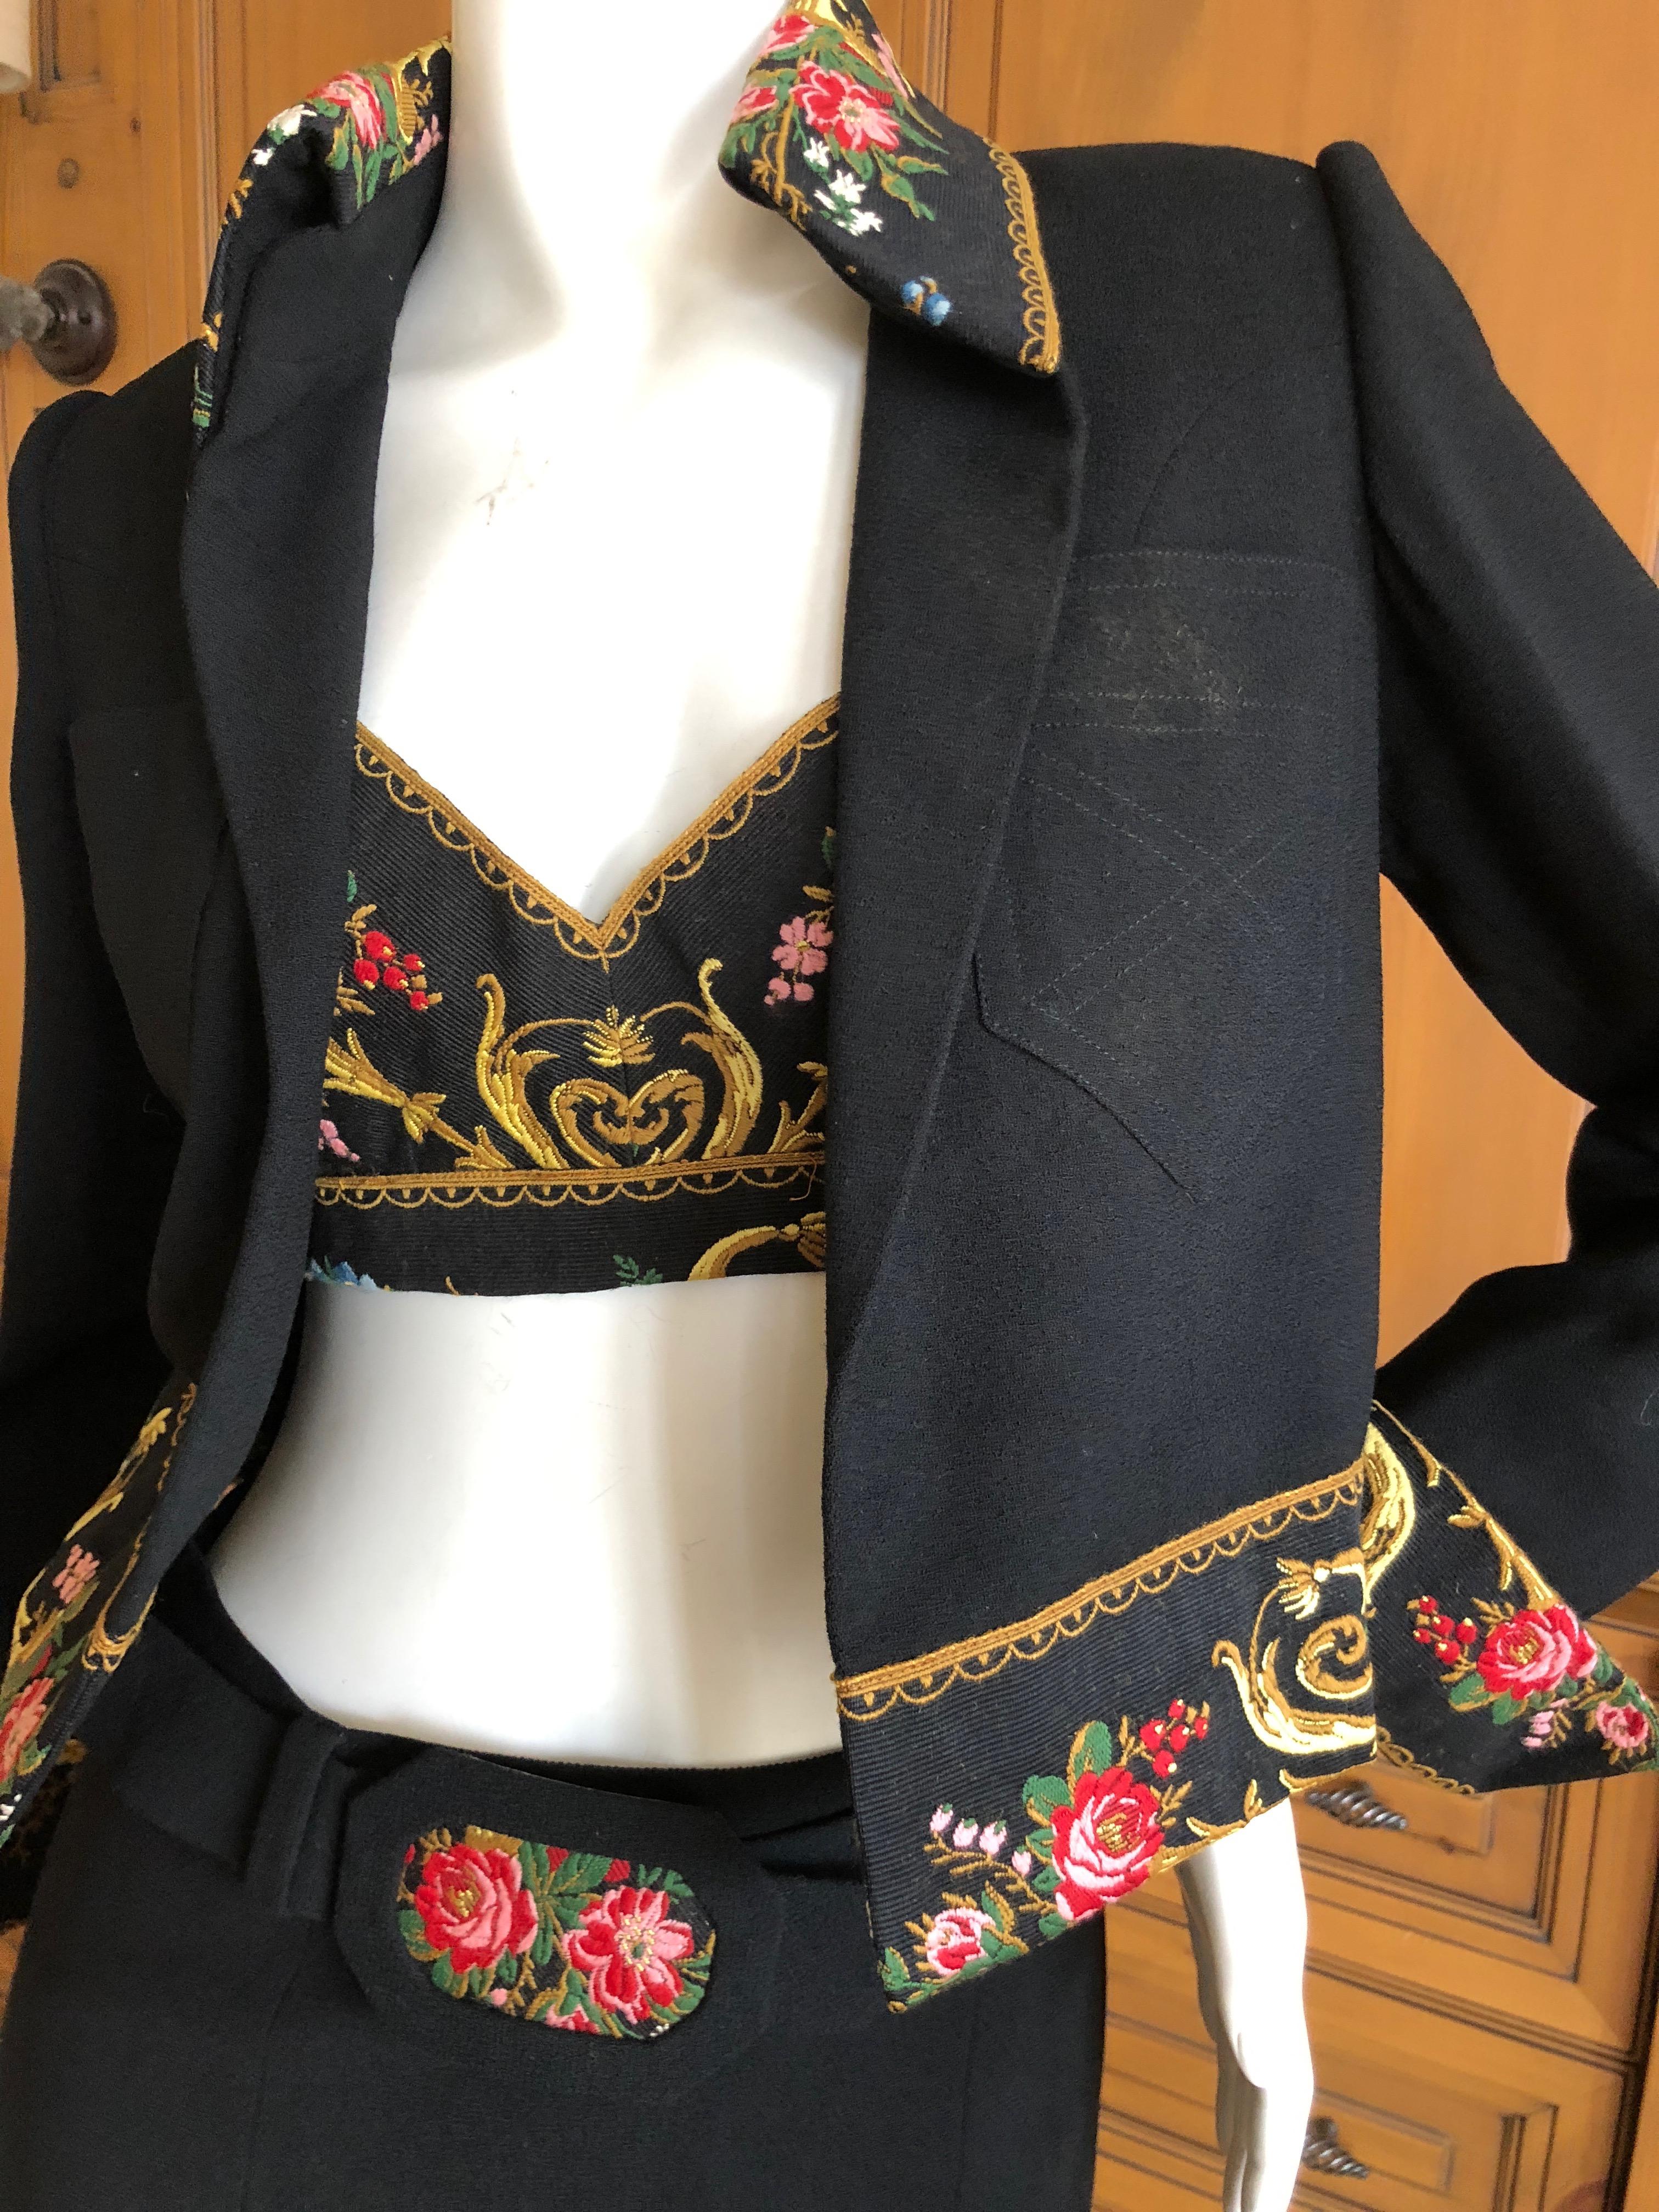 Cardinali Embroidered Black Cotton Skirt Suit with Midriff Baring Bra Fall 1971 

From the Archive of Marilyn Lewis, the creator of Cardinali
Cardinali was founded in Los Angeles in 1970, by Marilyn Lewis, who had already found success as the